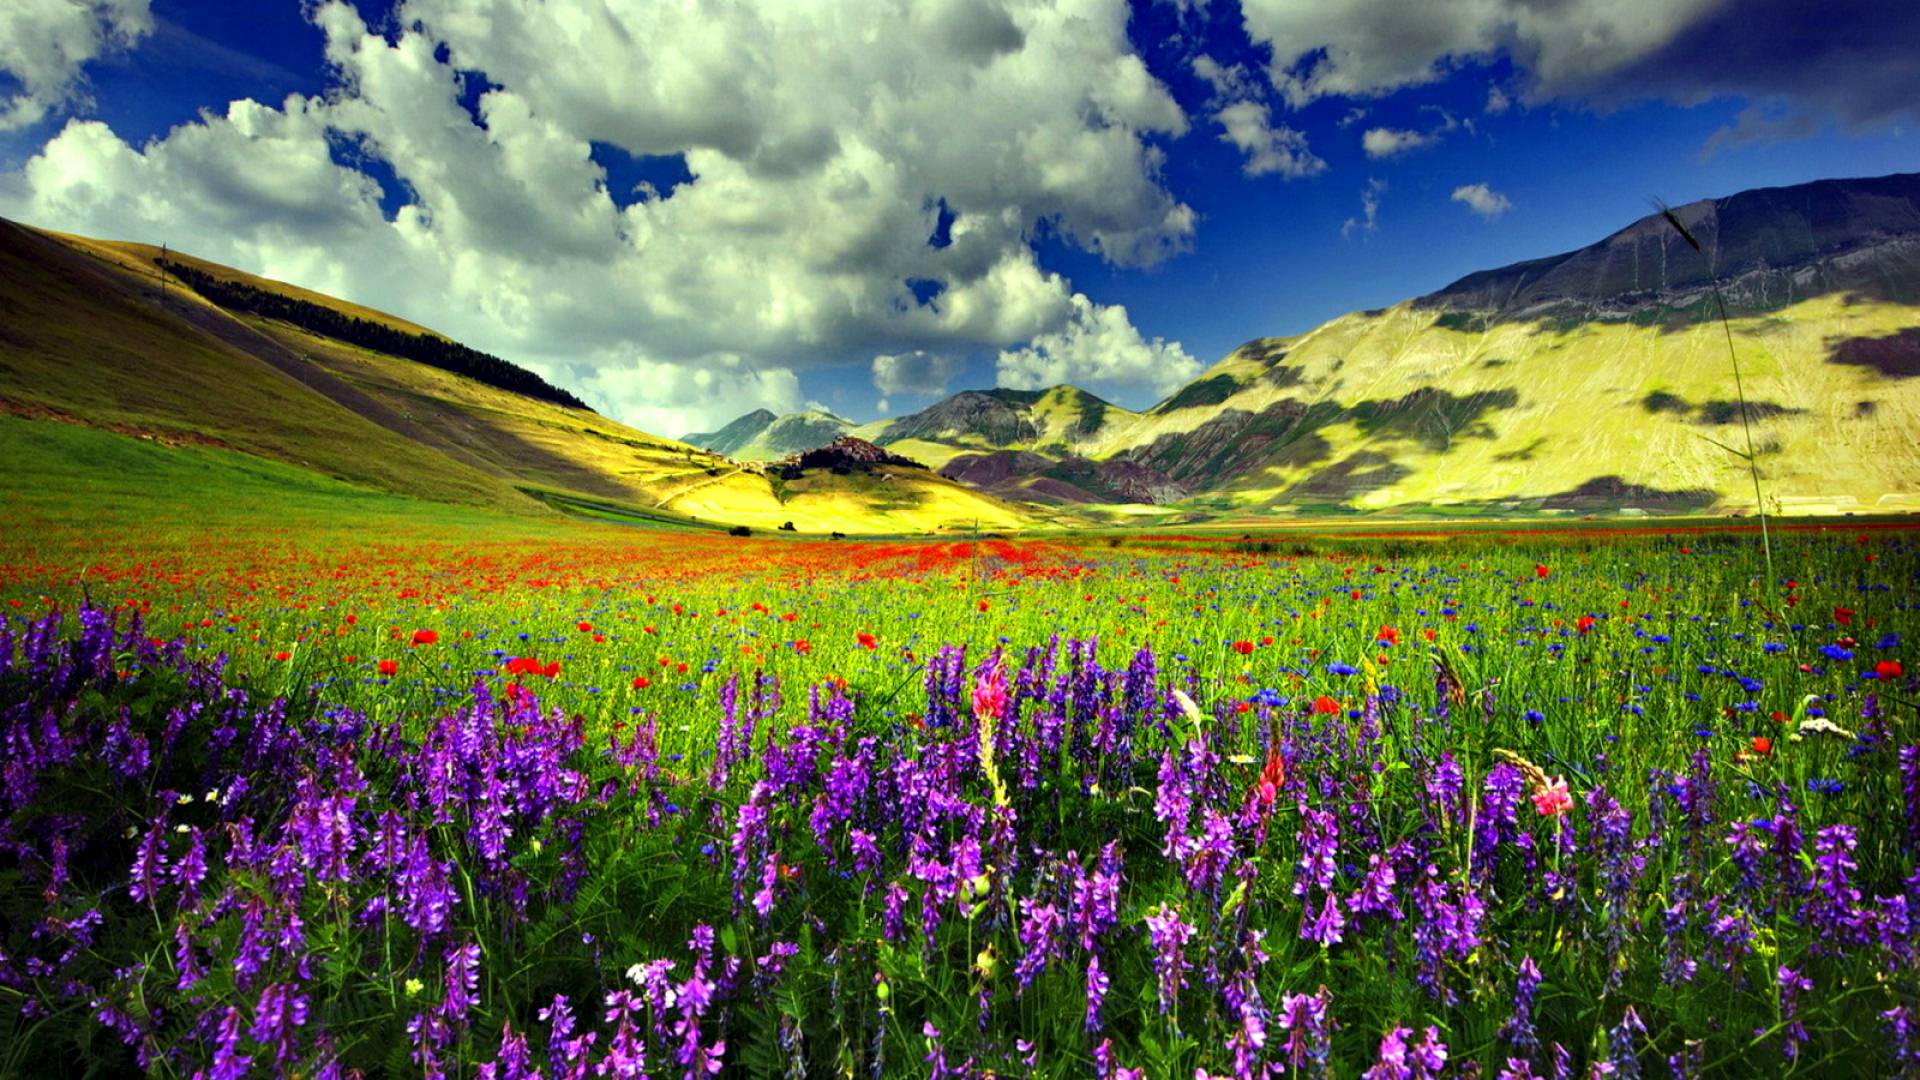 Mountains and spring florals pictures free backgrounds 